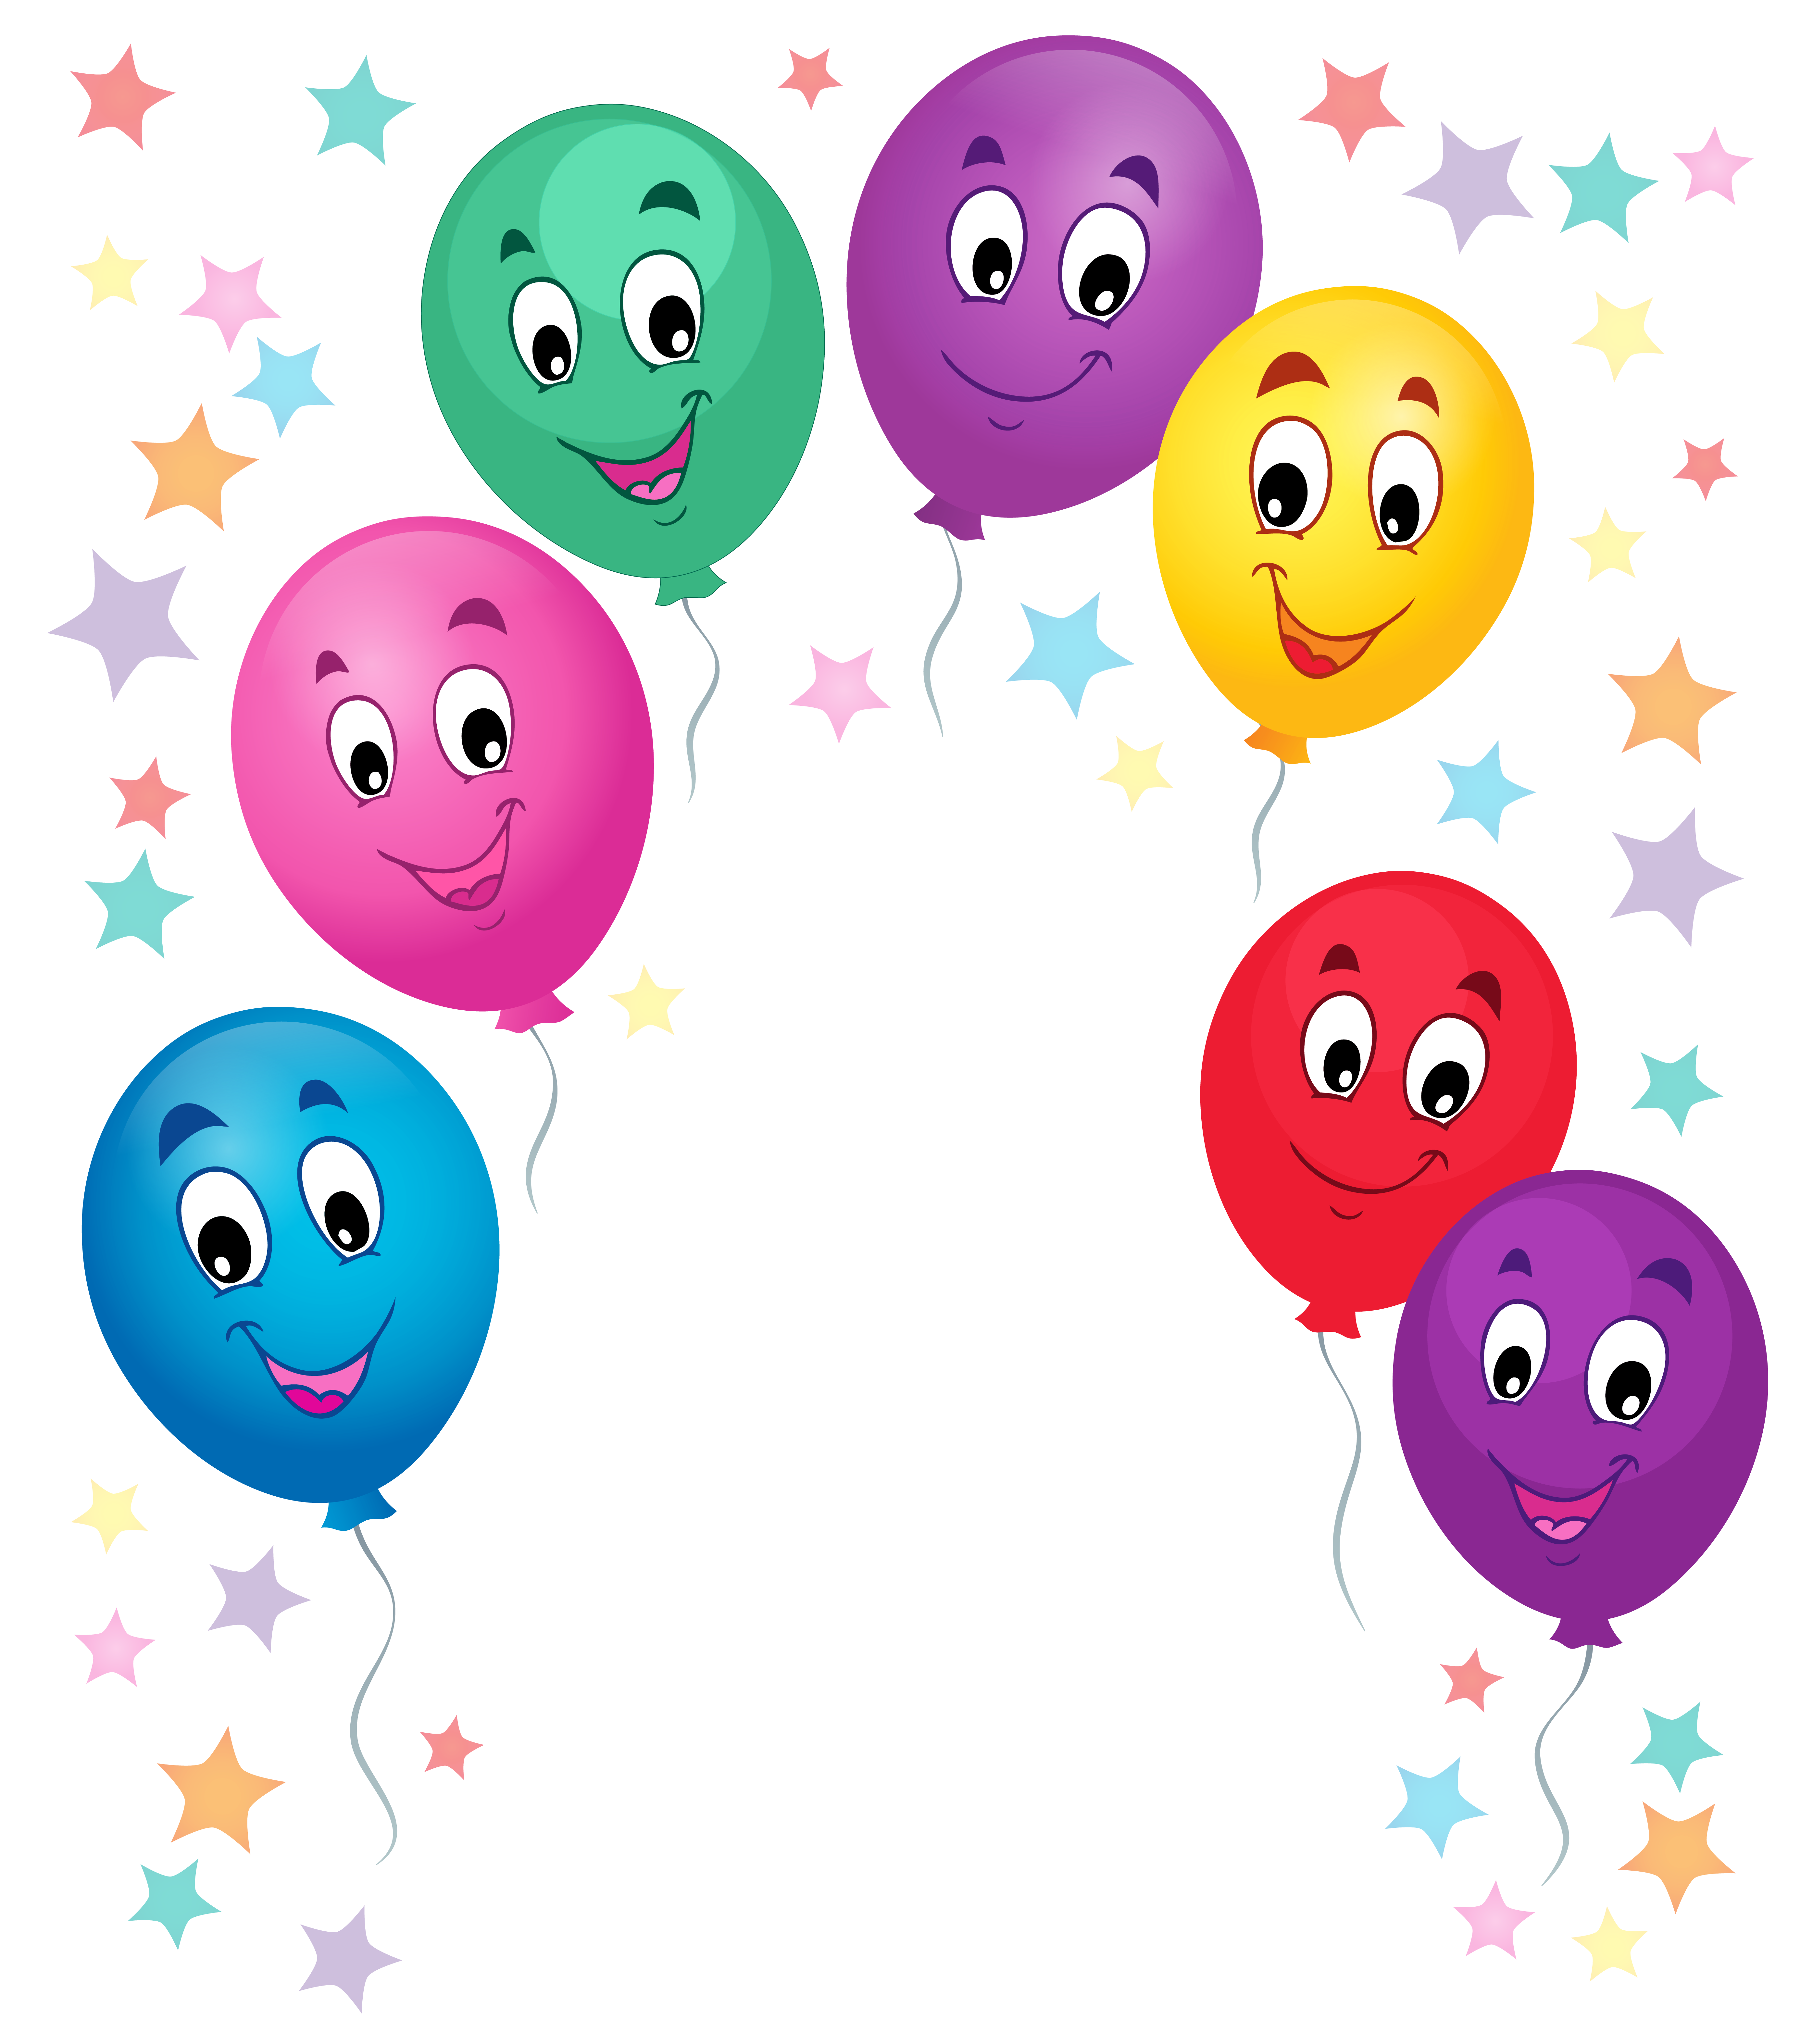 Balloons Cartoon Decoration PNG Clipart Picture | Gallery ...